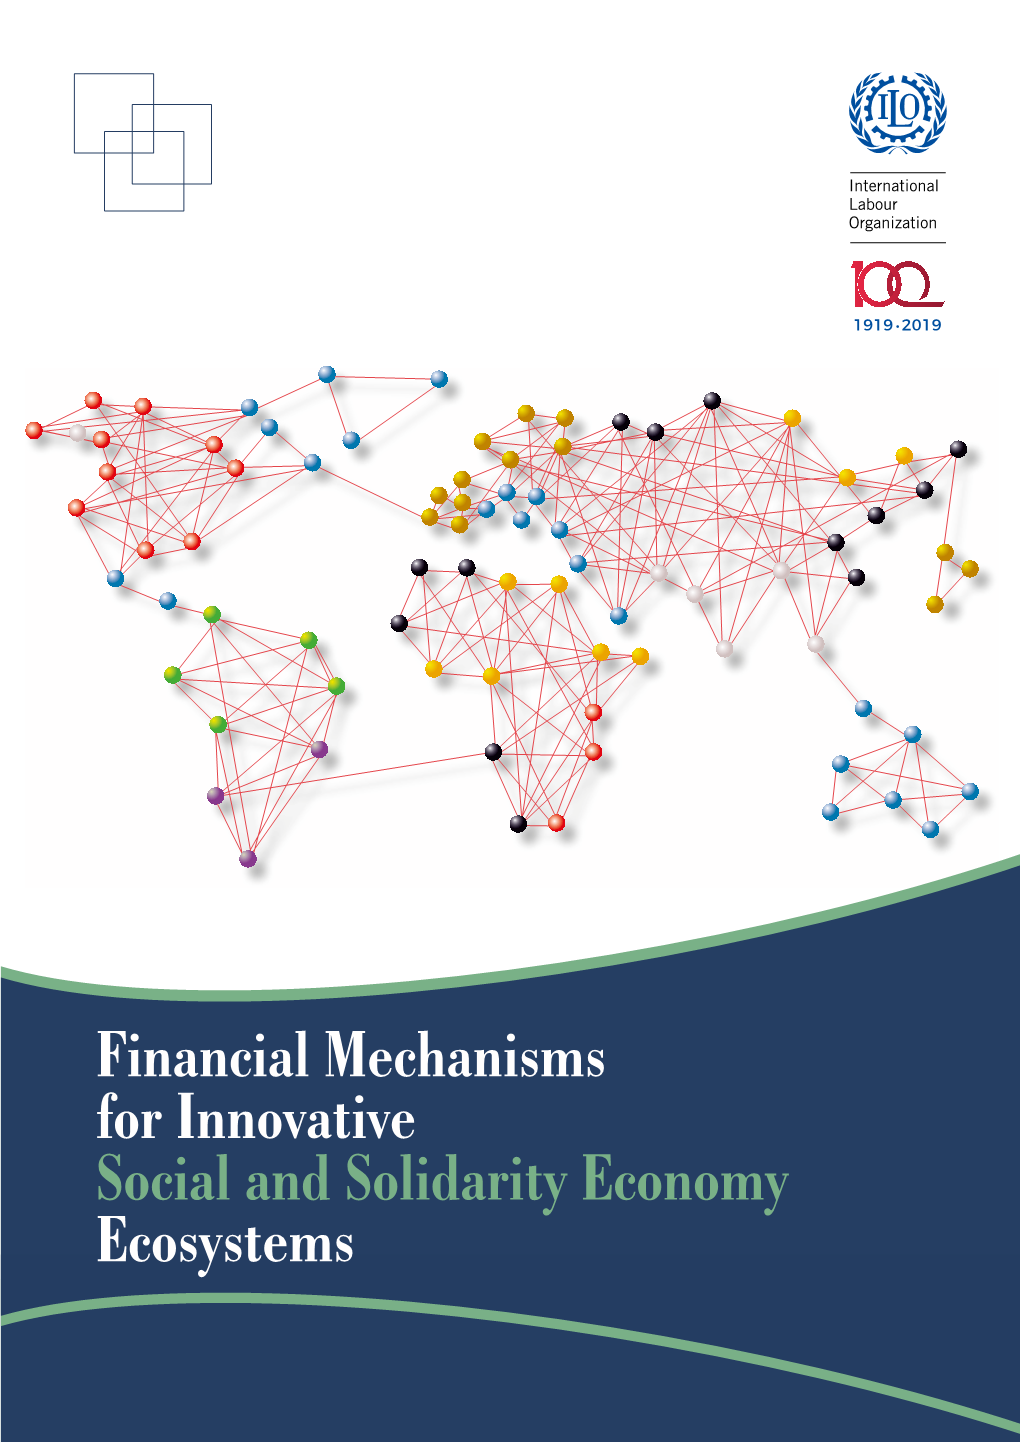 Financial Mechanisms for Innovative Social and Solidarity Economy Ecosystems